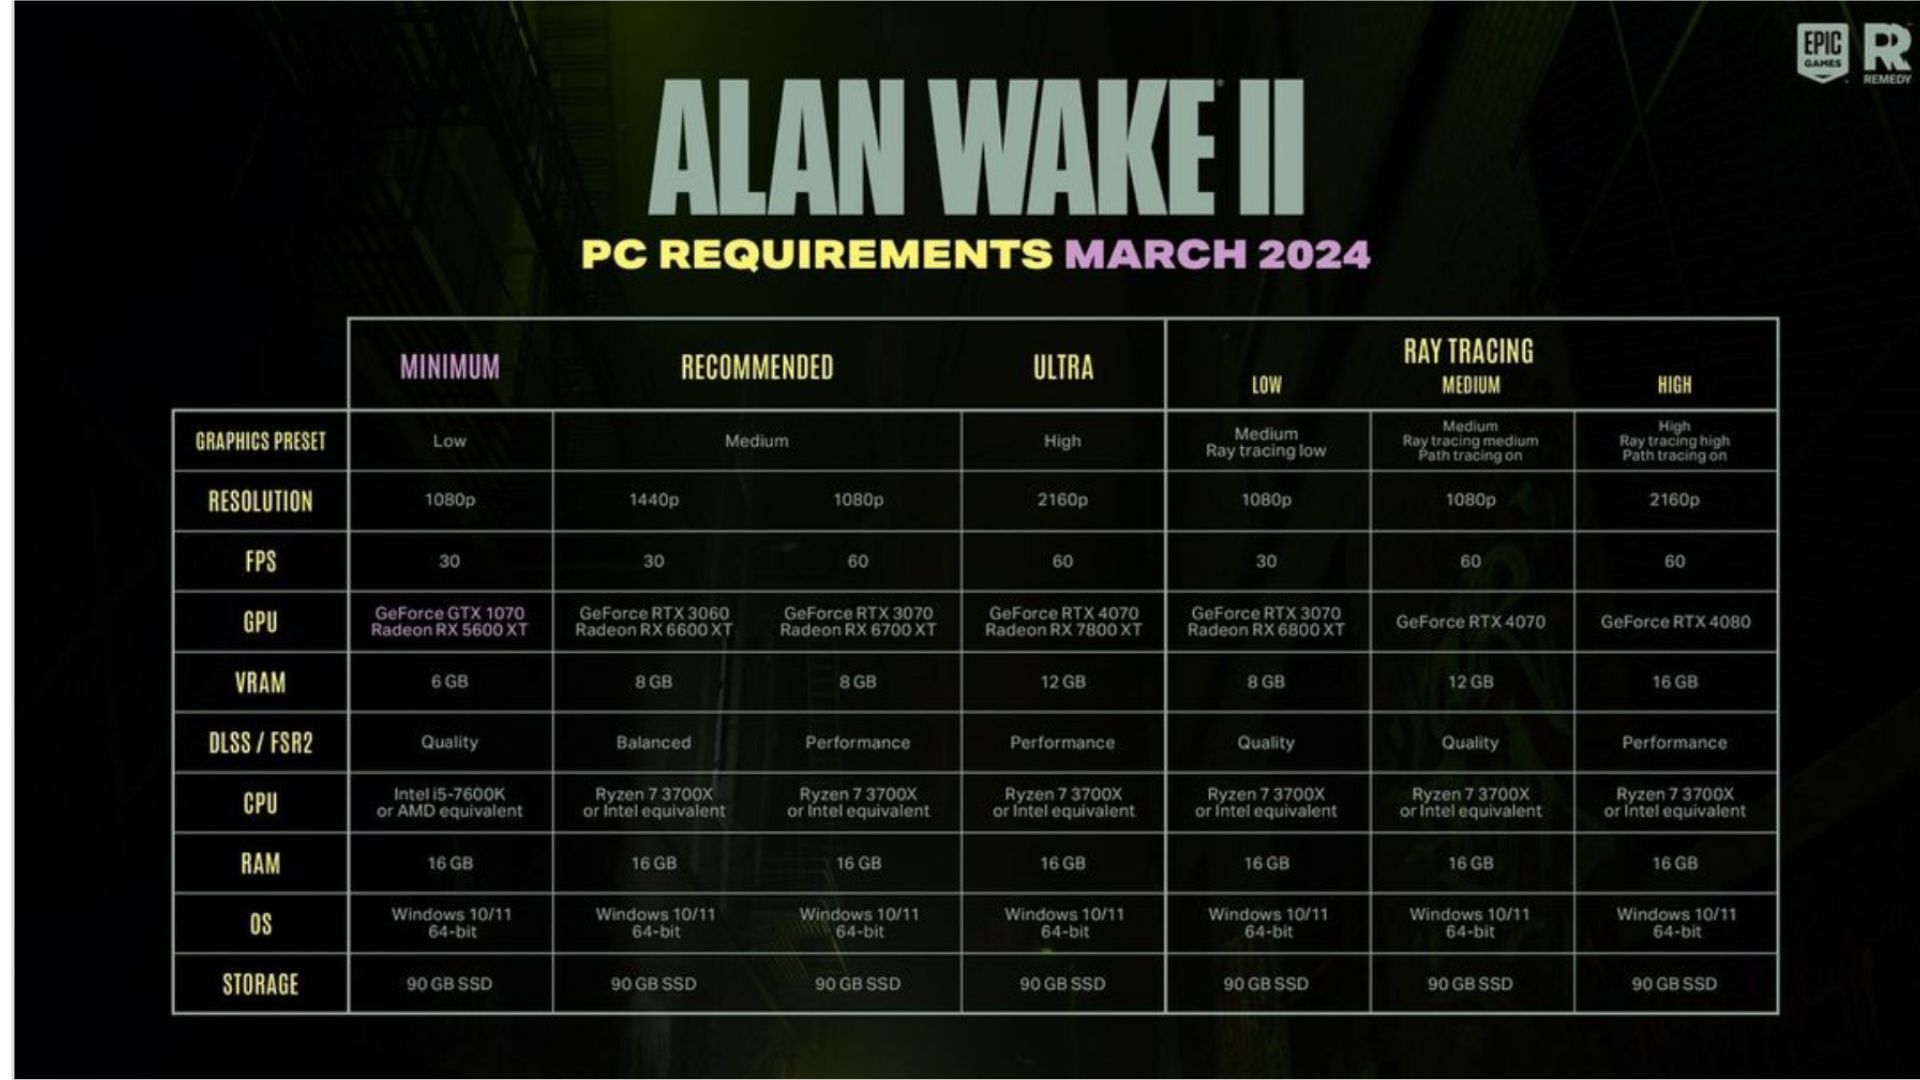 Image of Alan Wake 2 system requirements.